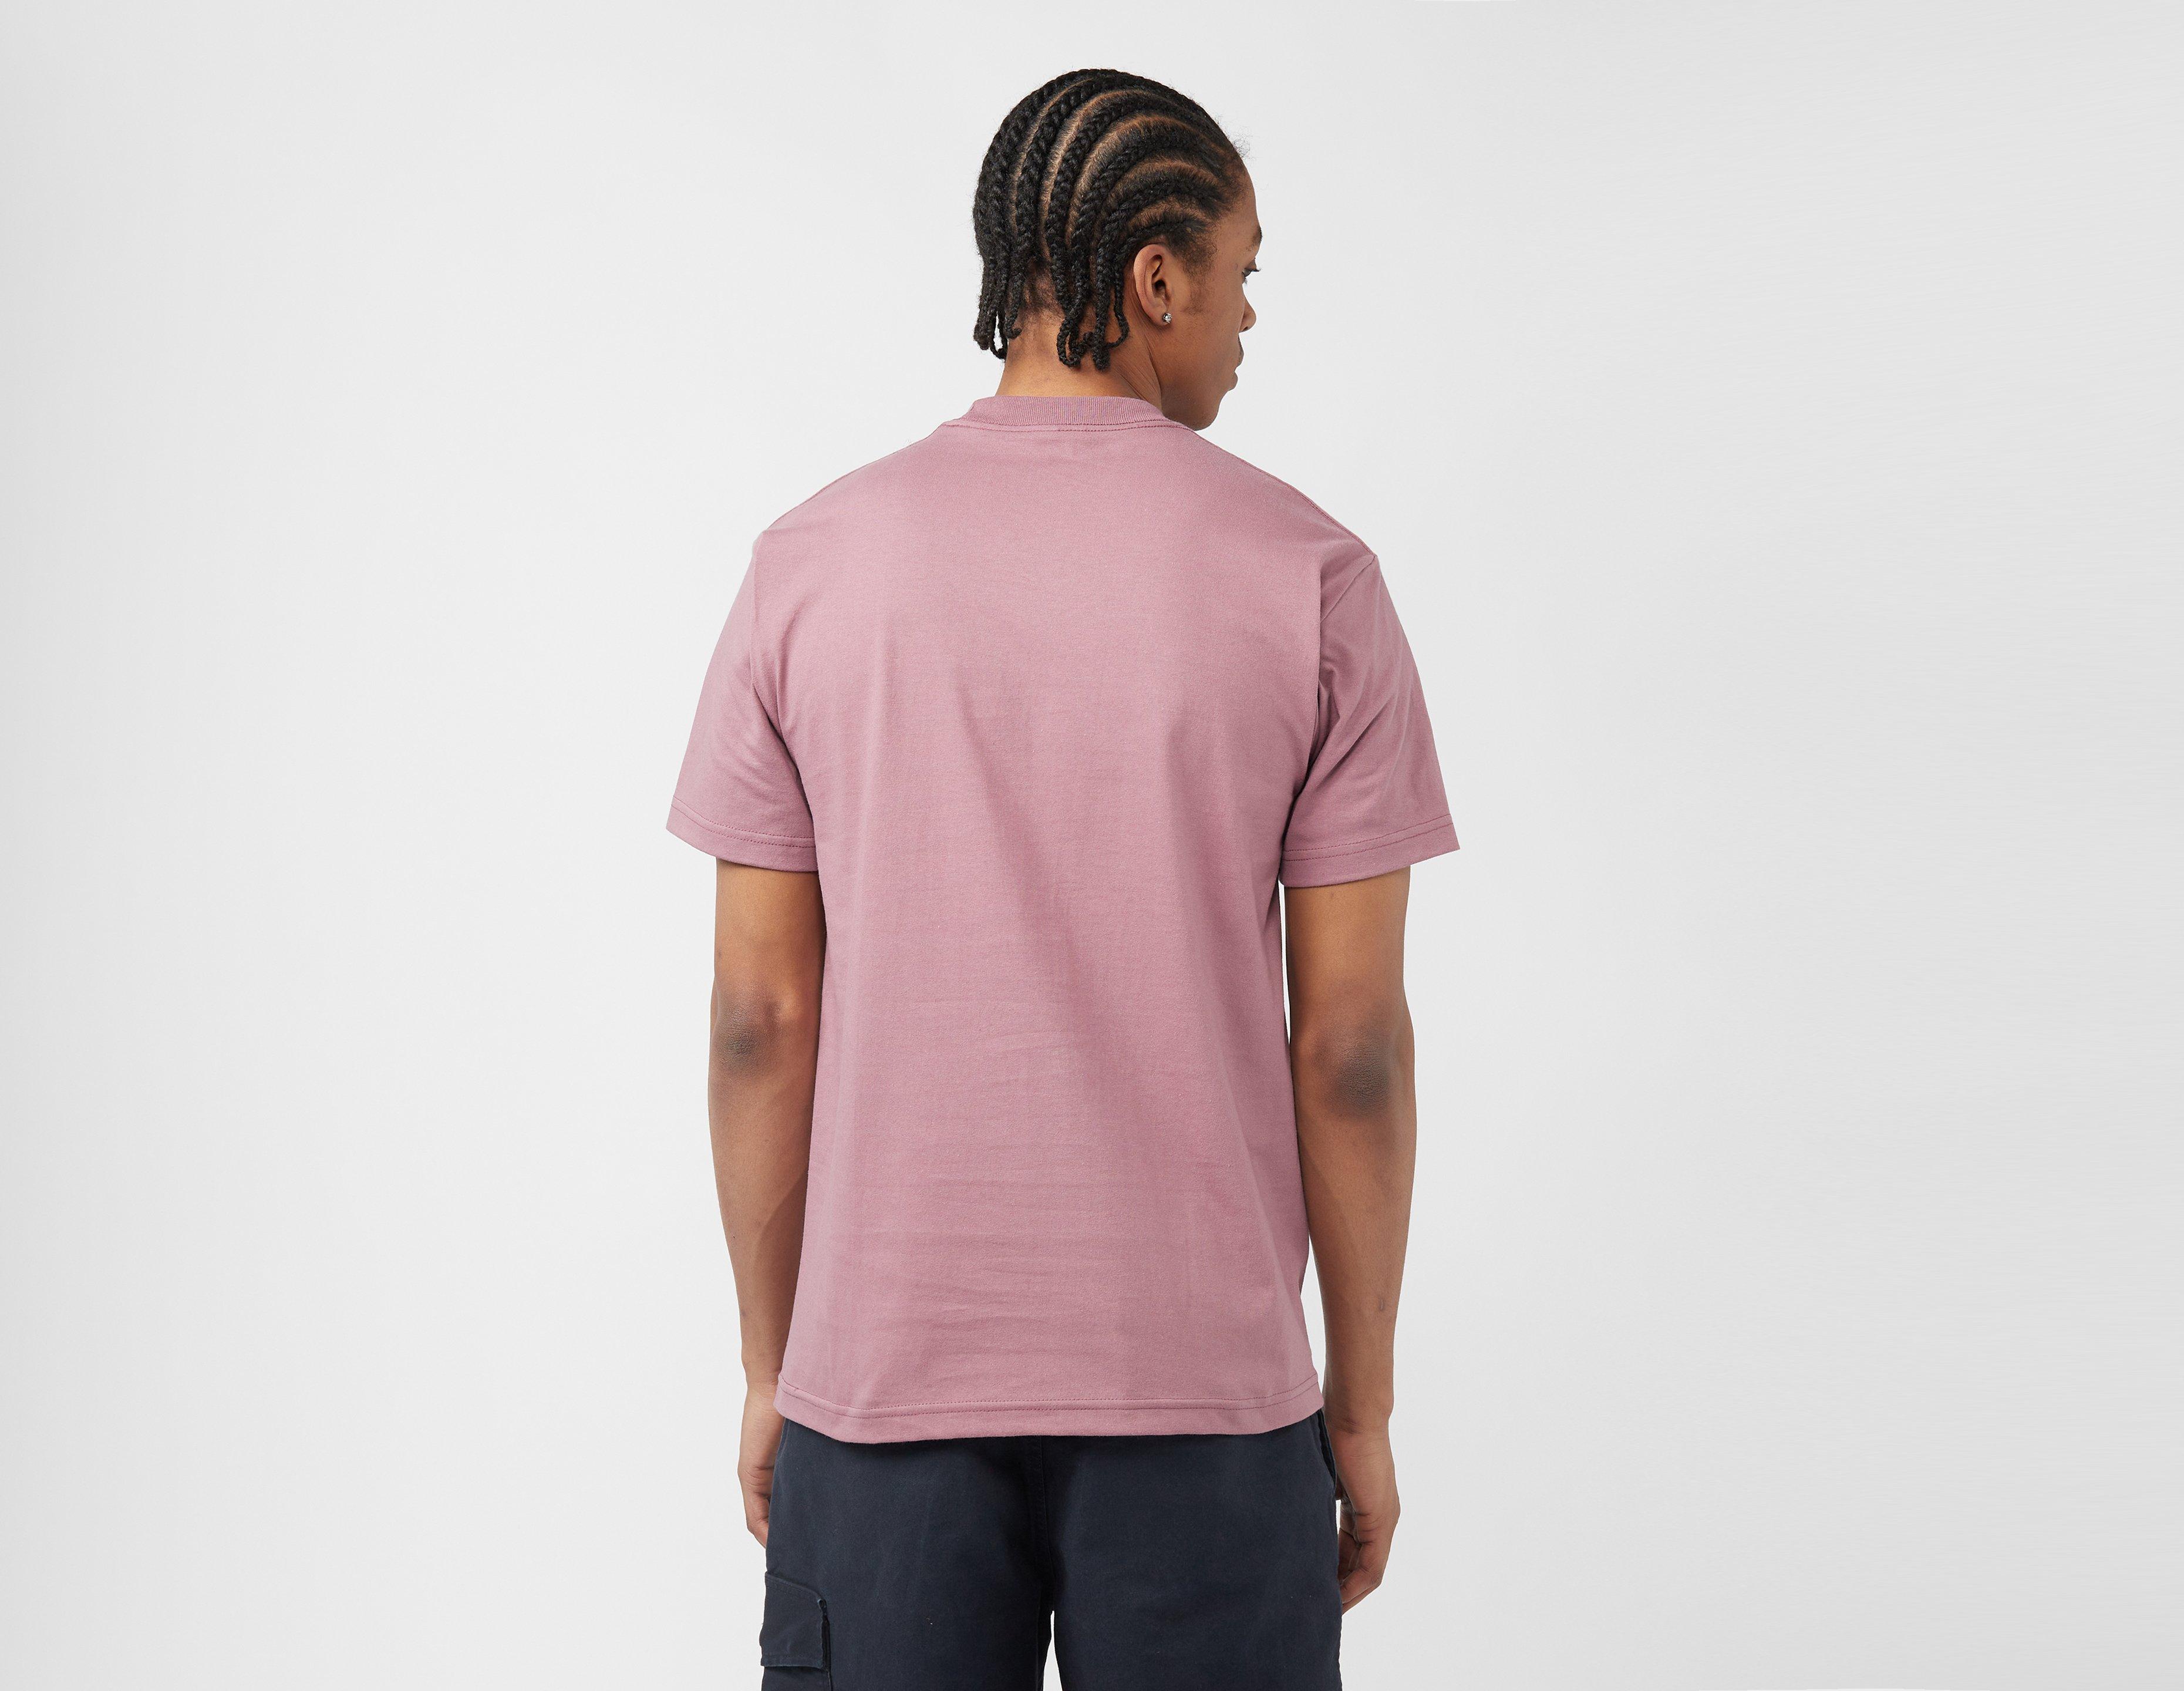 Healthdesign? | Shirt - Pink Huf shirt Best print - black unchained Show In T in wash t- acid back